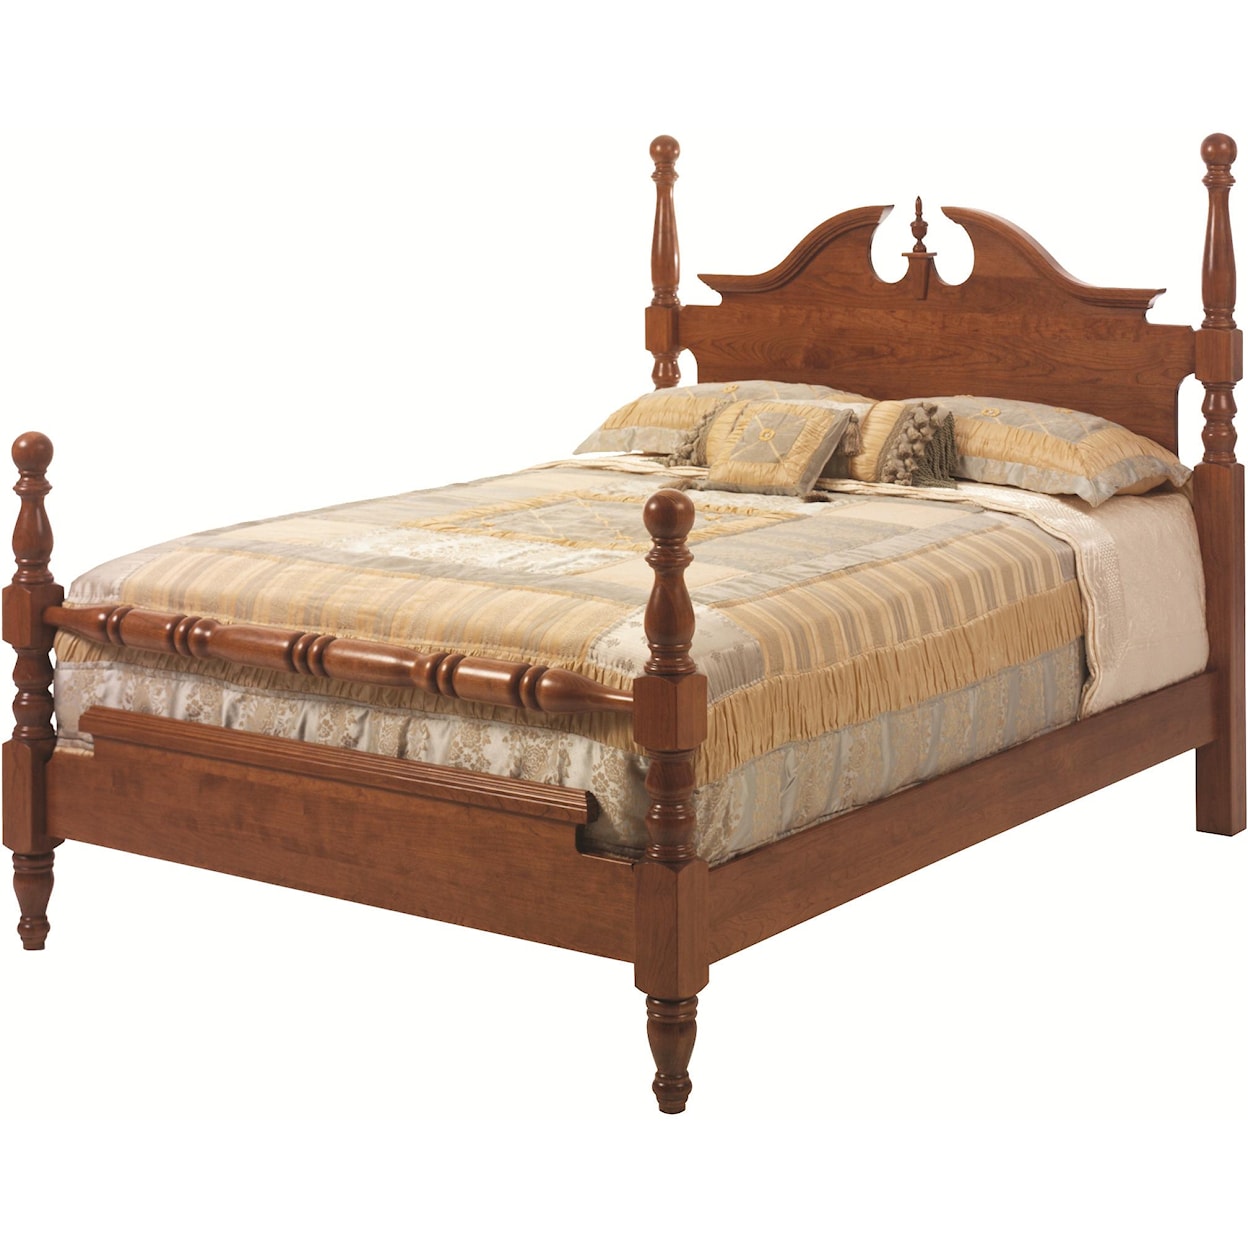 Millcraft Elegant River Bend King Cannon Ball Bed